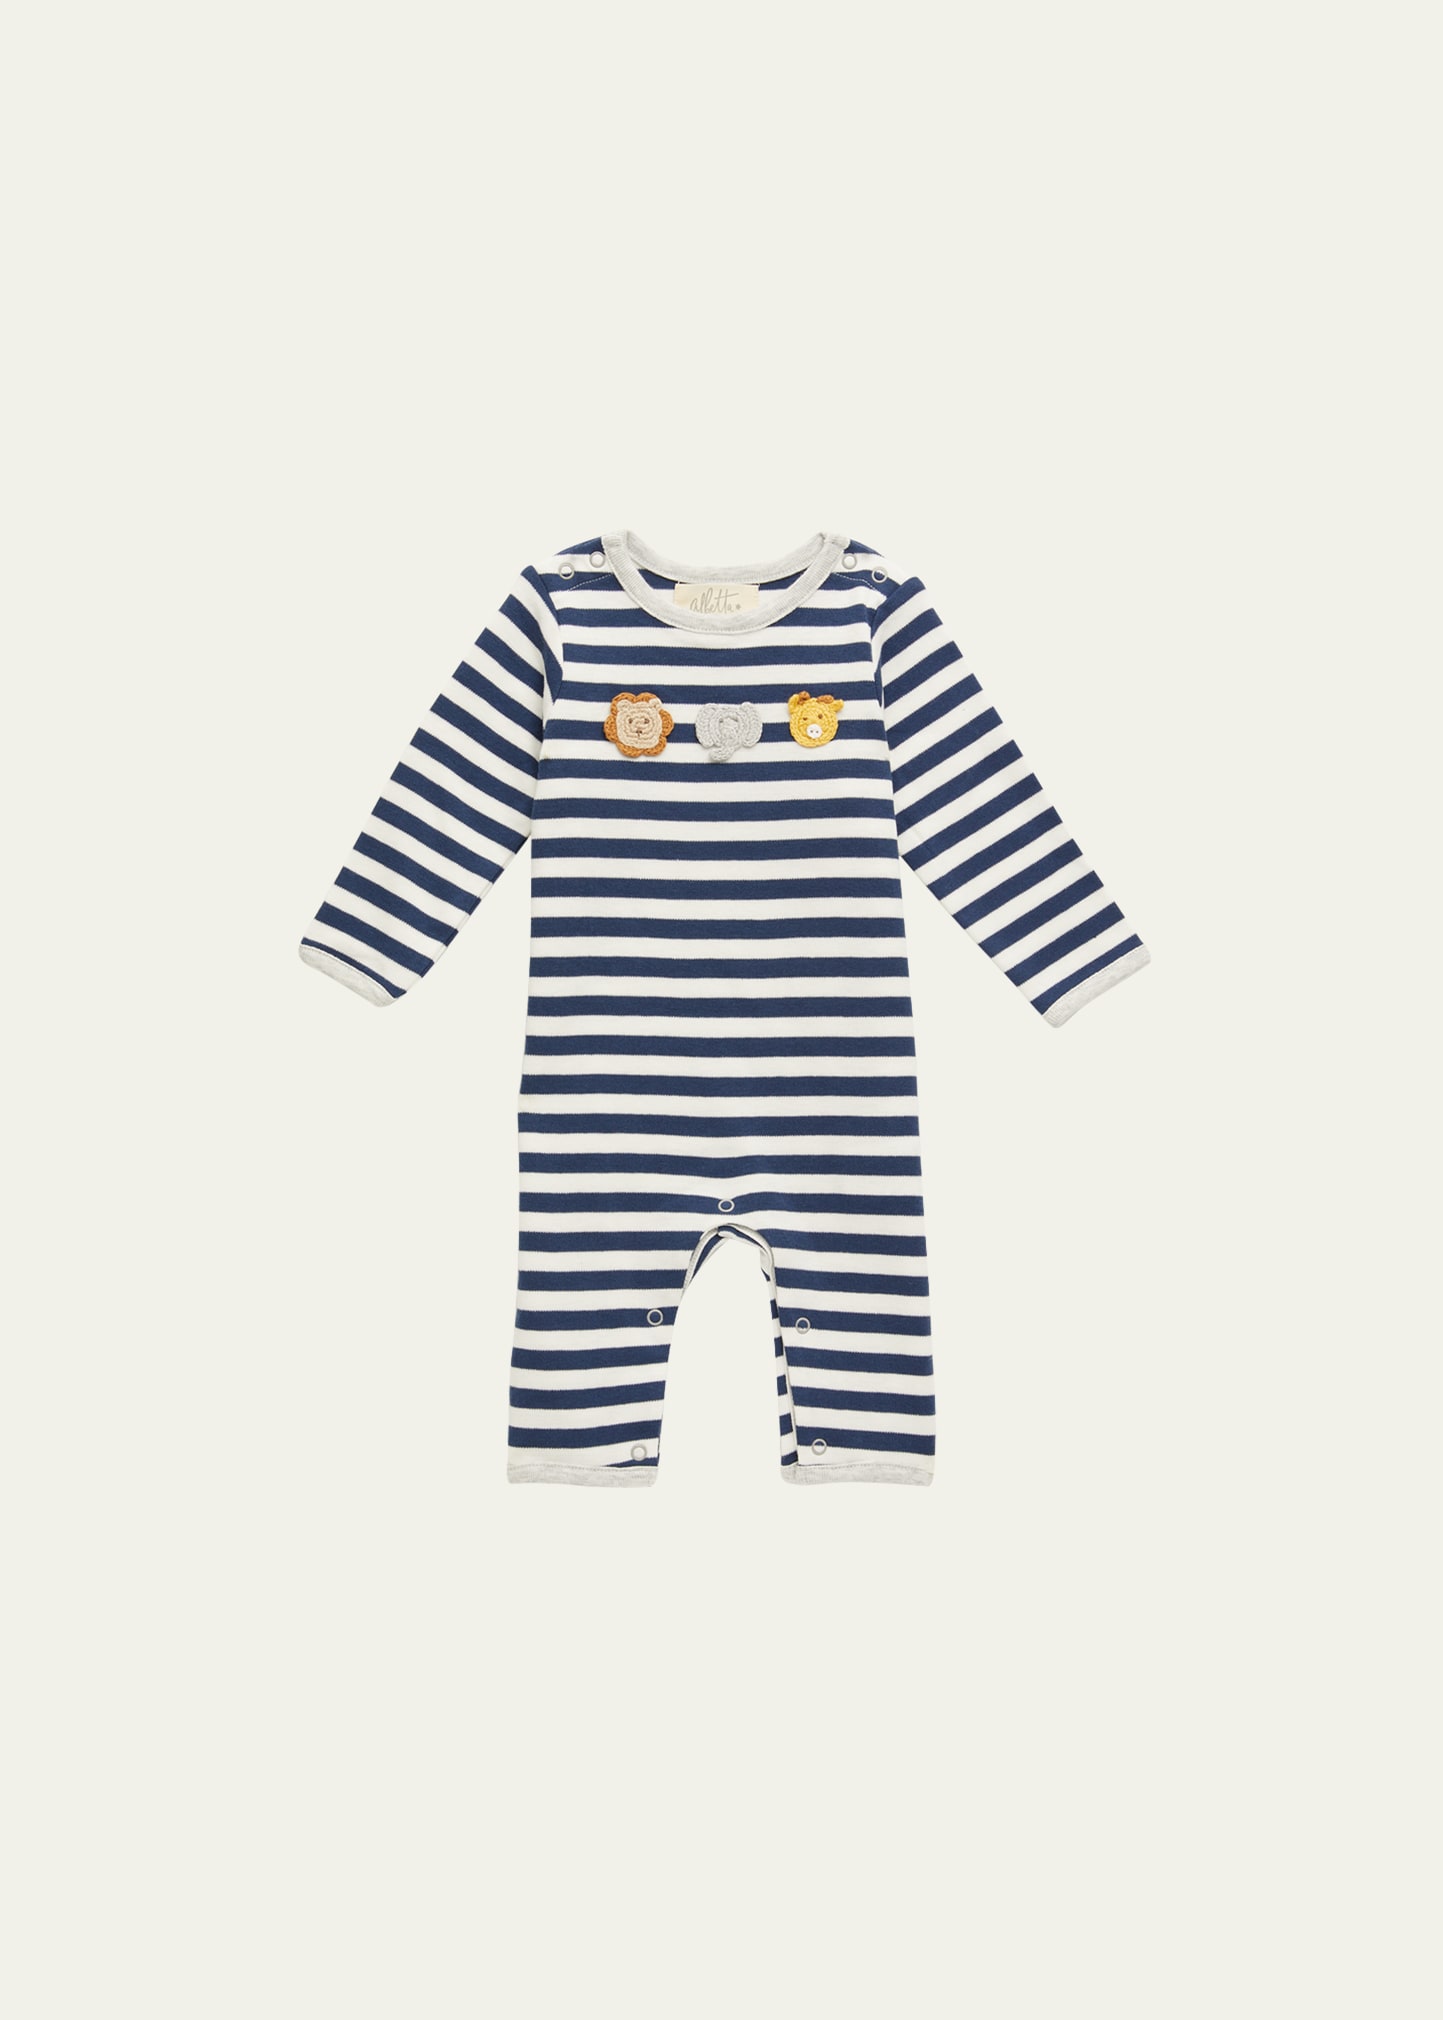 Albetta Babies' Kid's Striped Animal Hand Crotched Playsuit In Blue